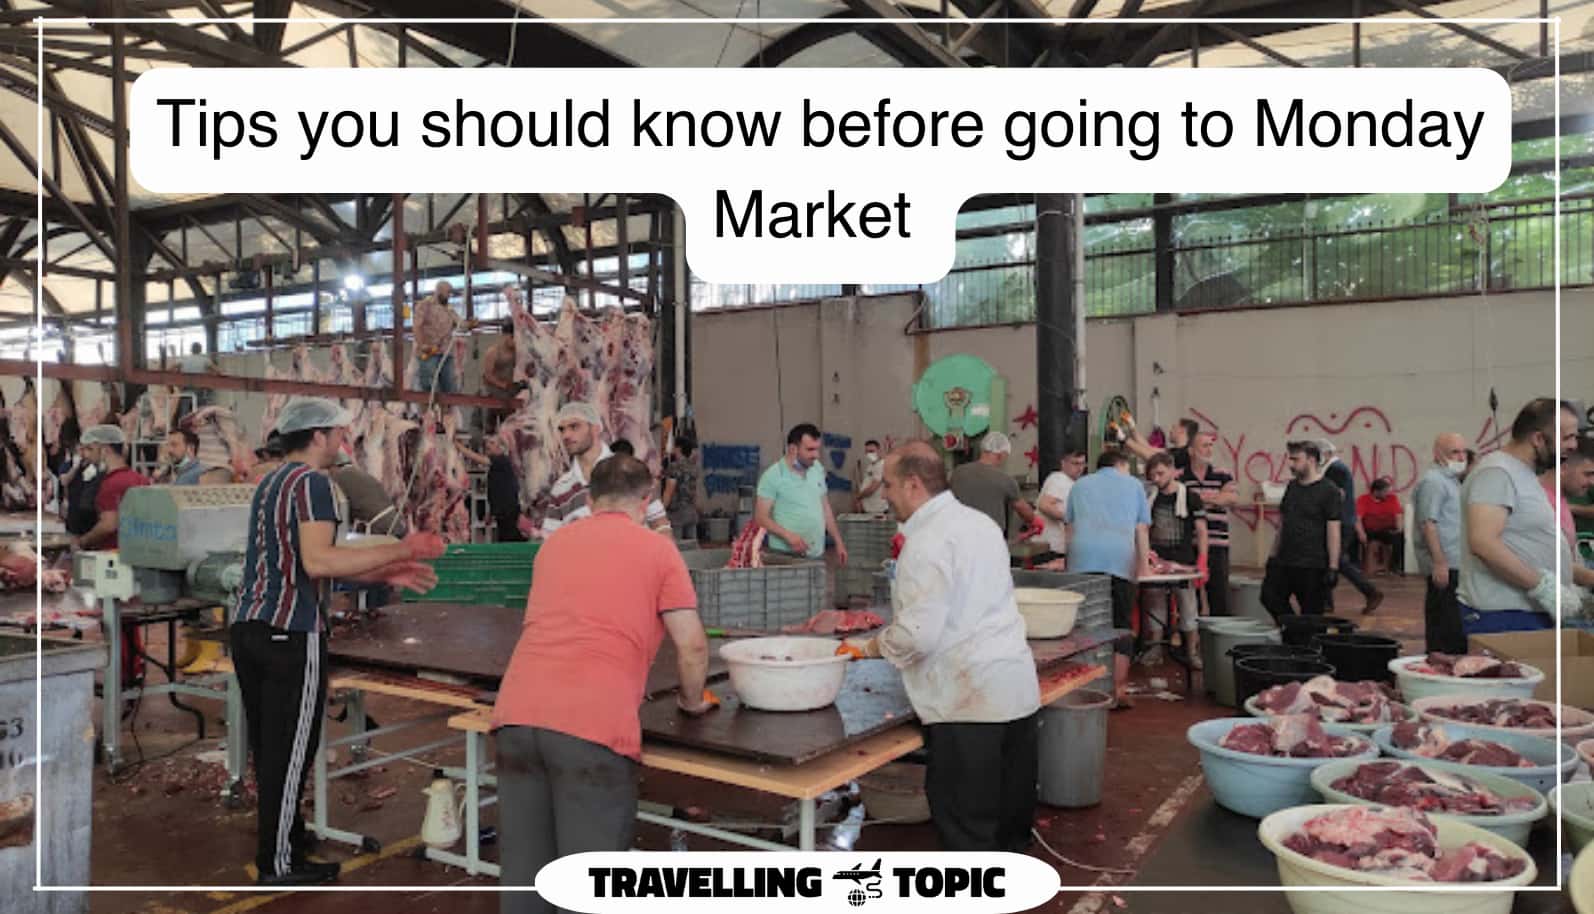 Tips you should know before going to Monday Market